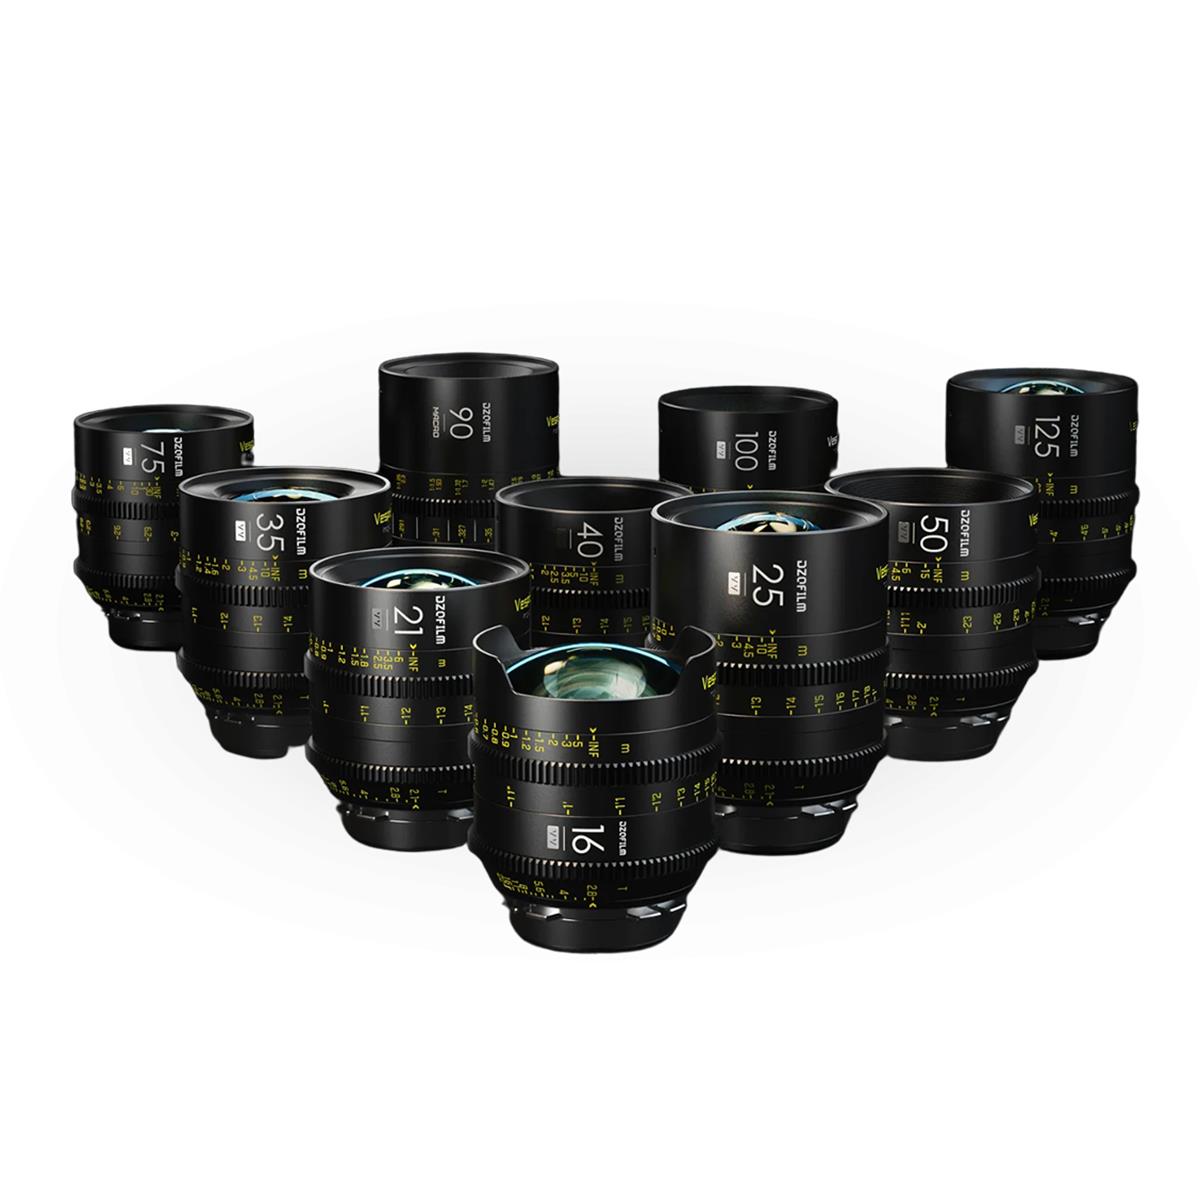 Image of DZOFILM Vespid Prime Cinema 10-Lens Kit for PL Mount and Canon EF